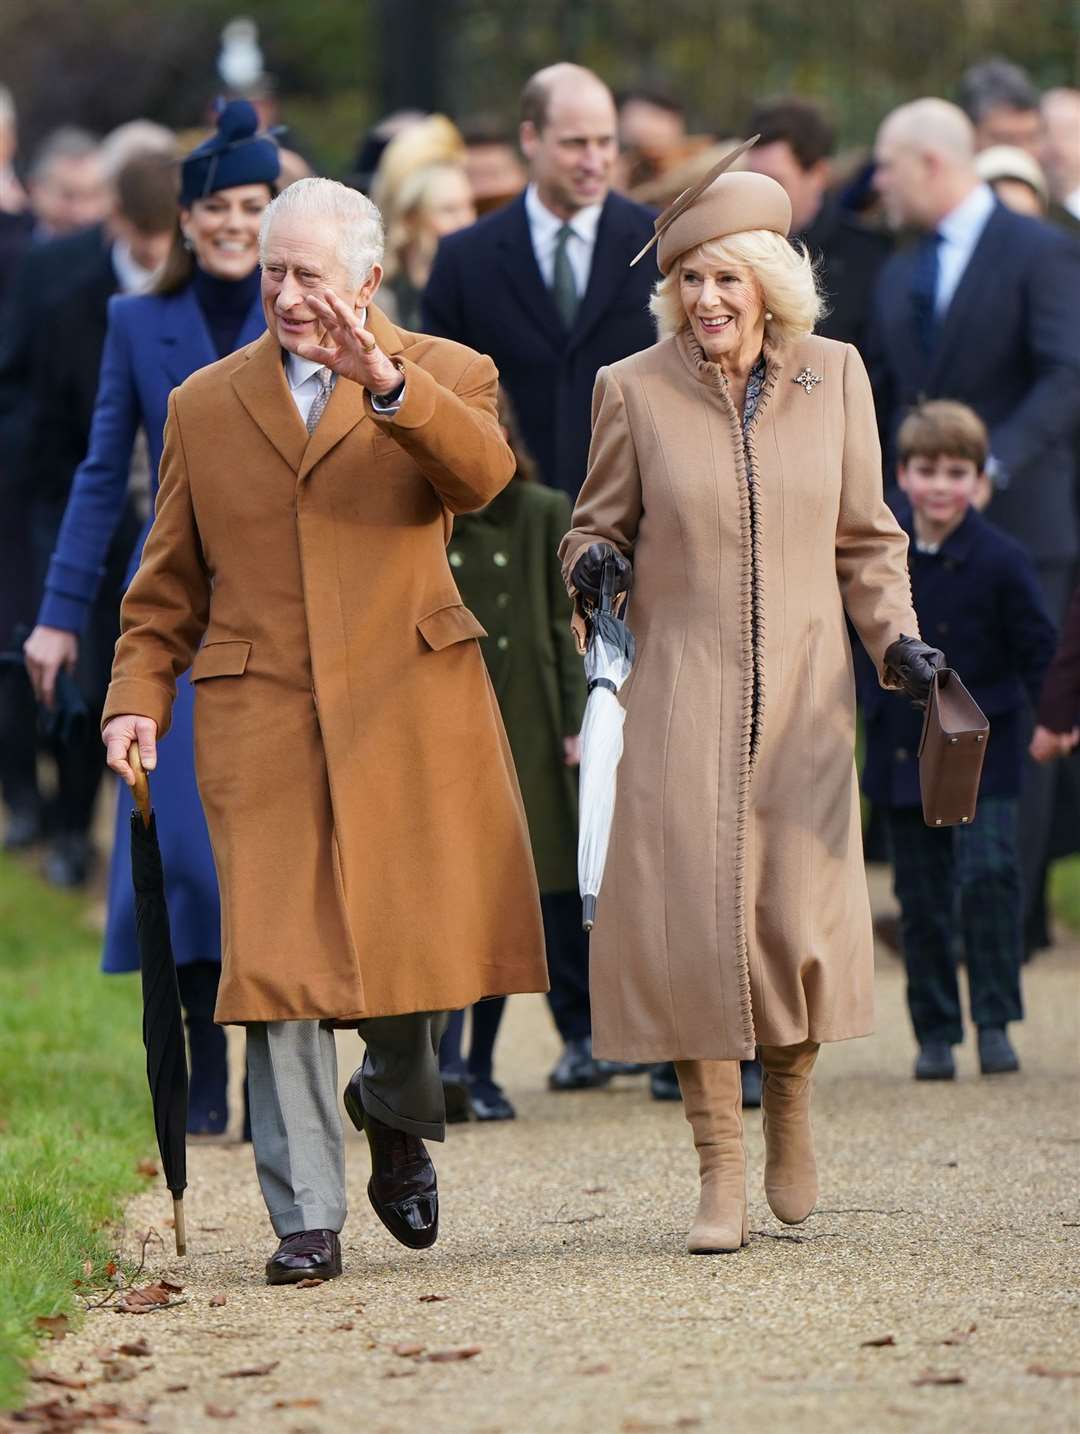 Royal watchers turned out to see the King and Queen Camilla attending the Christmas Day church service at St Mary Magdalene Church in Sandringham (Joe Giddens/PA)